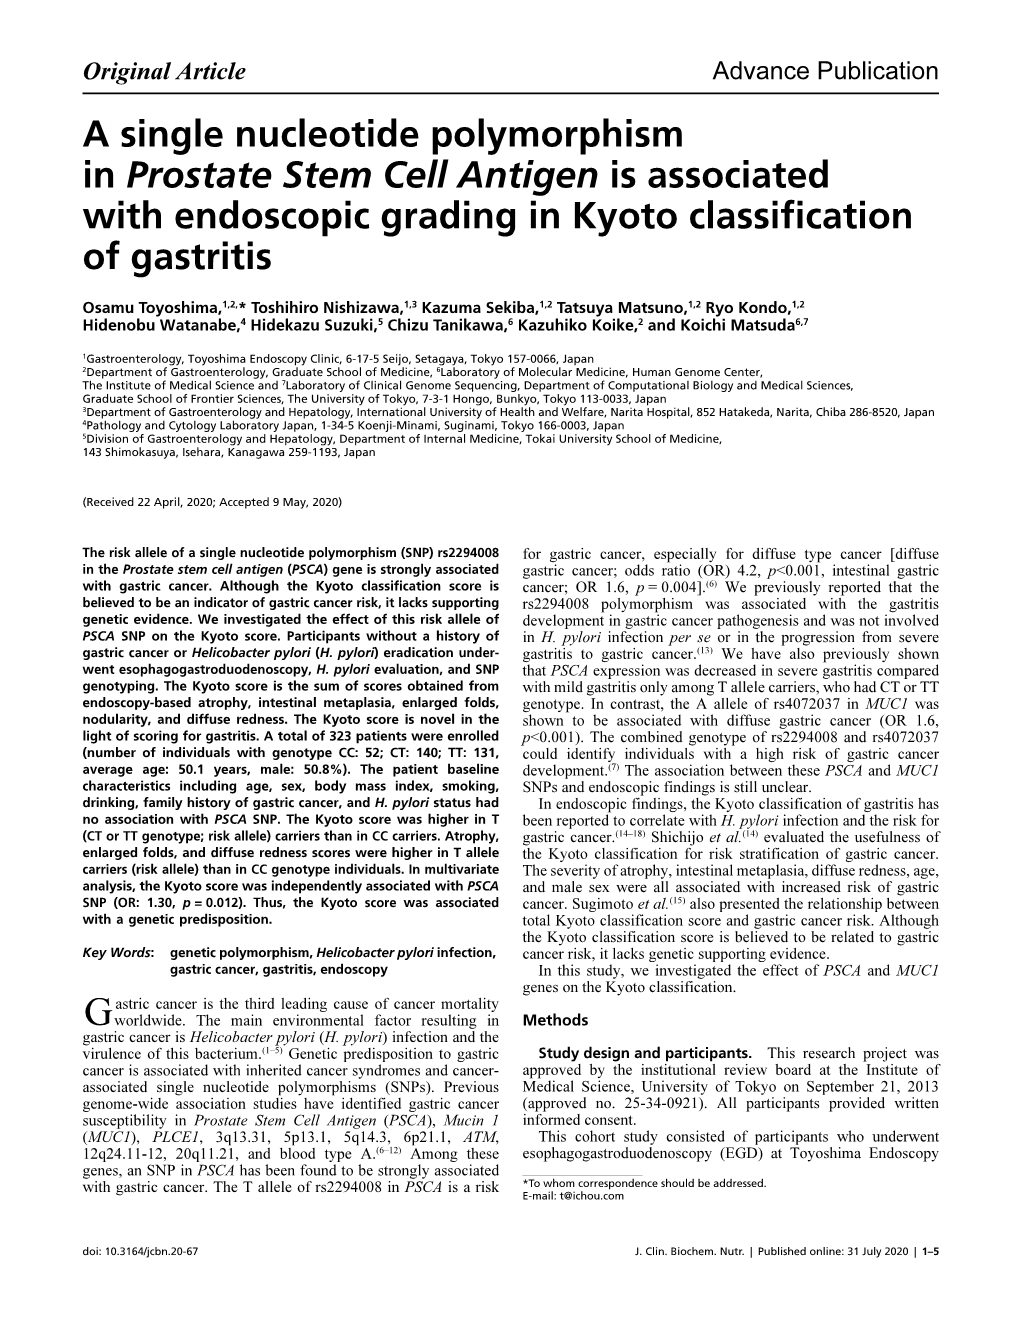 A Single Nucleotide Polymorphism in Prostate Stem Cell Antigen Is